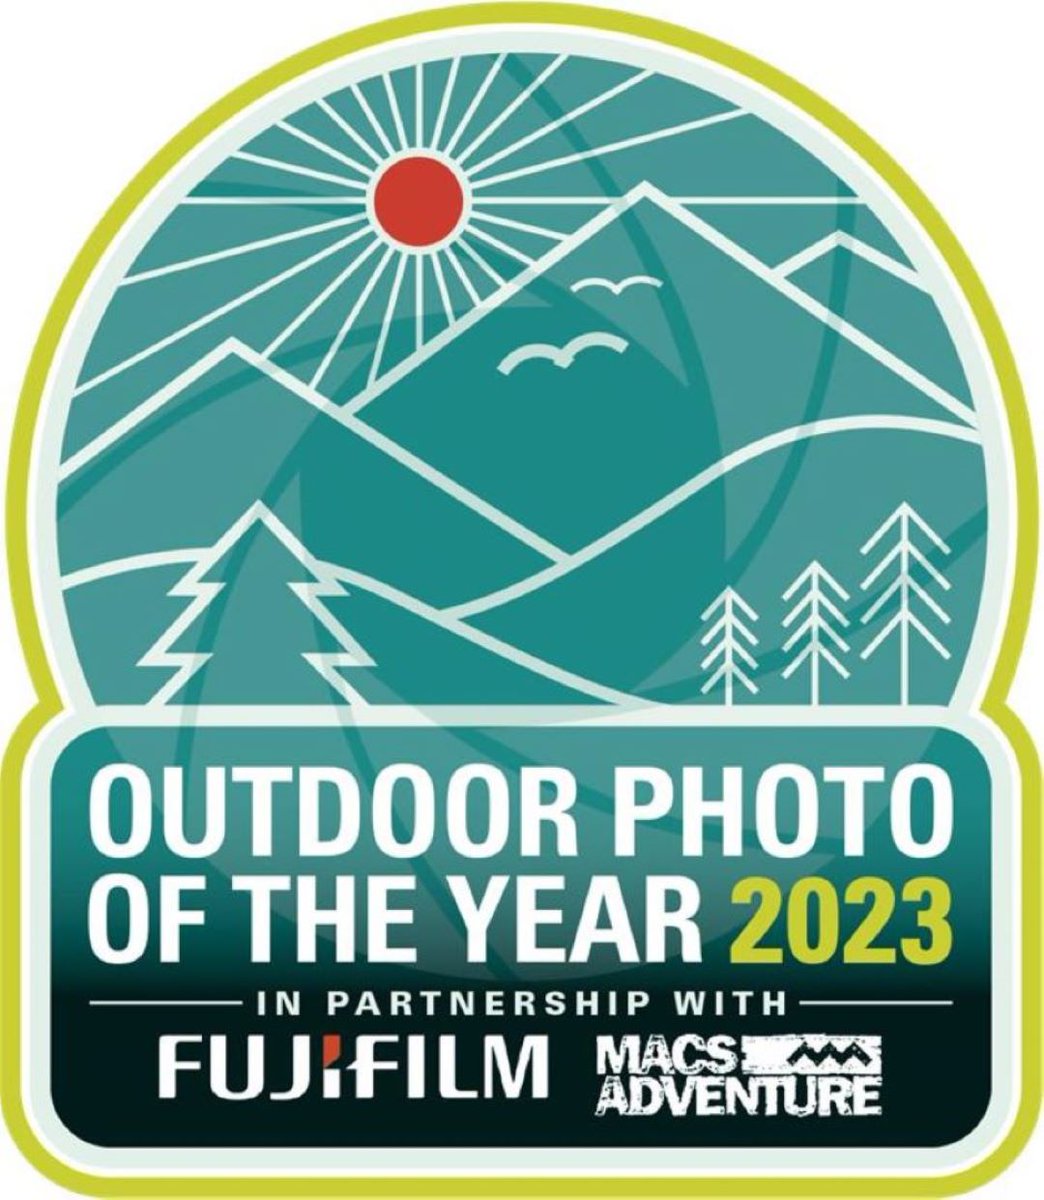 With a massive thank you to our sponsors FujiFilm & Macs Adventure, the results are in for our Outdoor Photo of The Year competition! From hundreds of your stunning images - THE WINNERS ARE livefortheoutdoors.com/opoty/